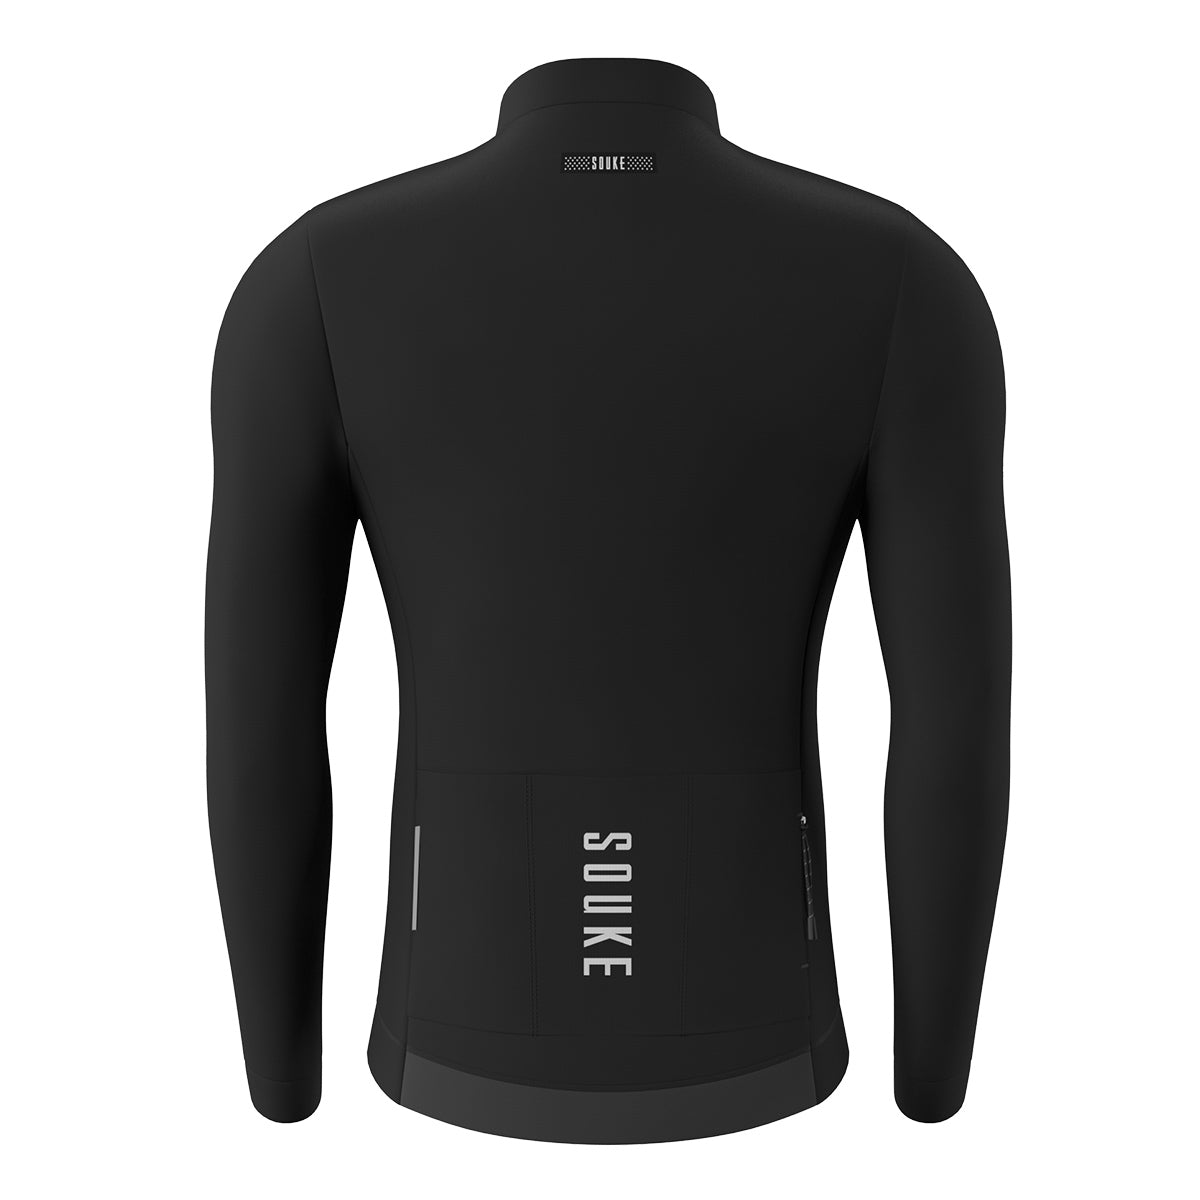 cycling long sleeve jersey, Black jersey,jersey for winter,Black long jersey,jersey for winter and autumn, cold weather jersey (6805618360433)